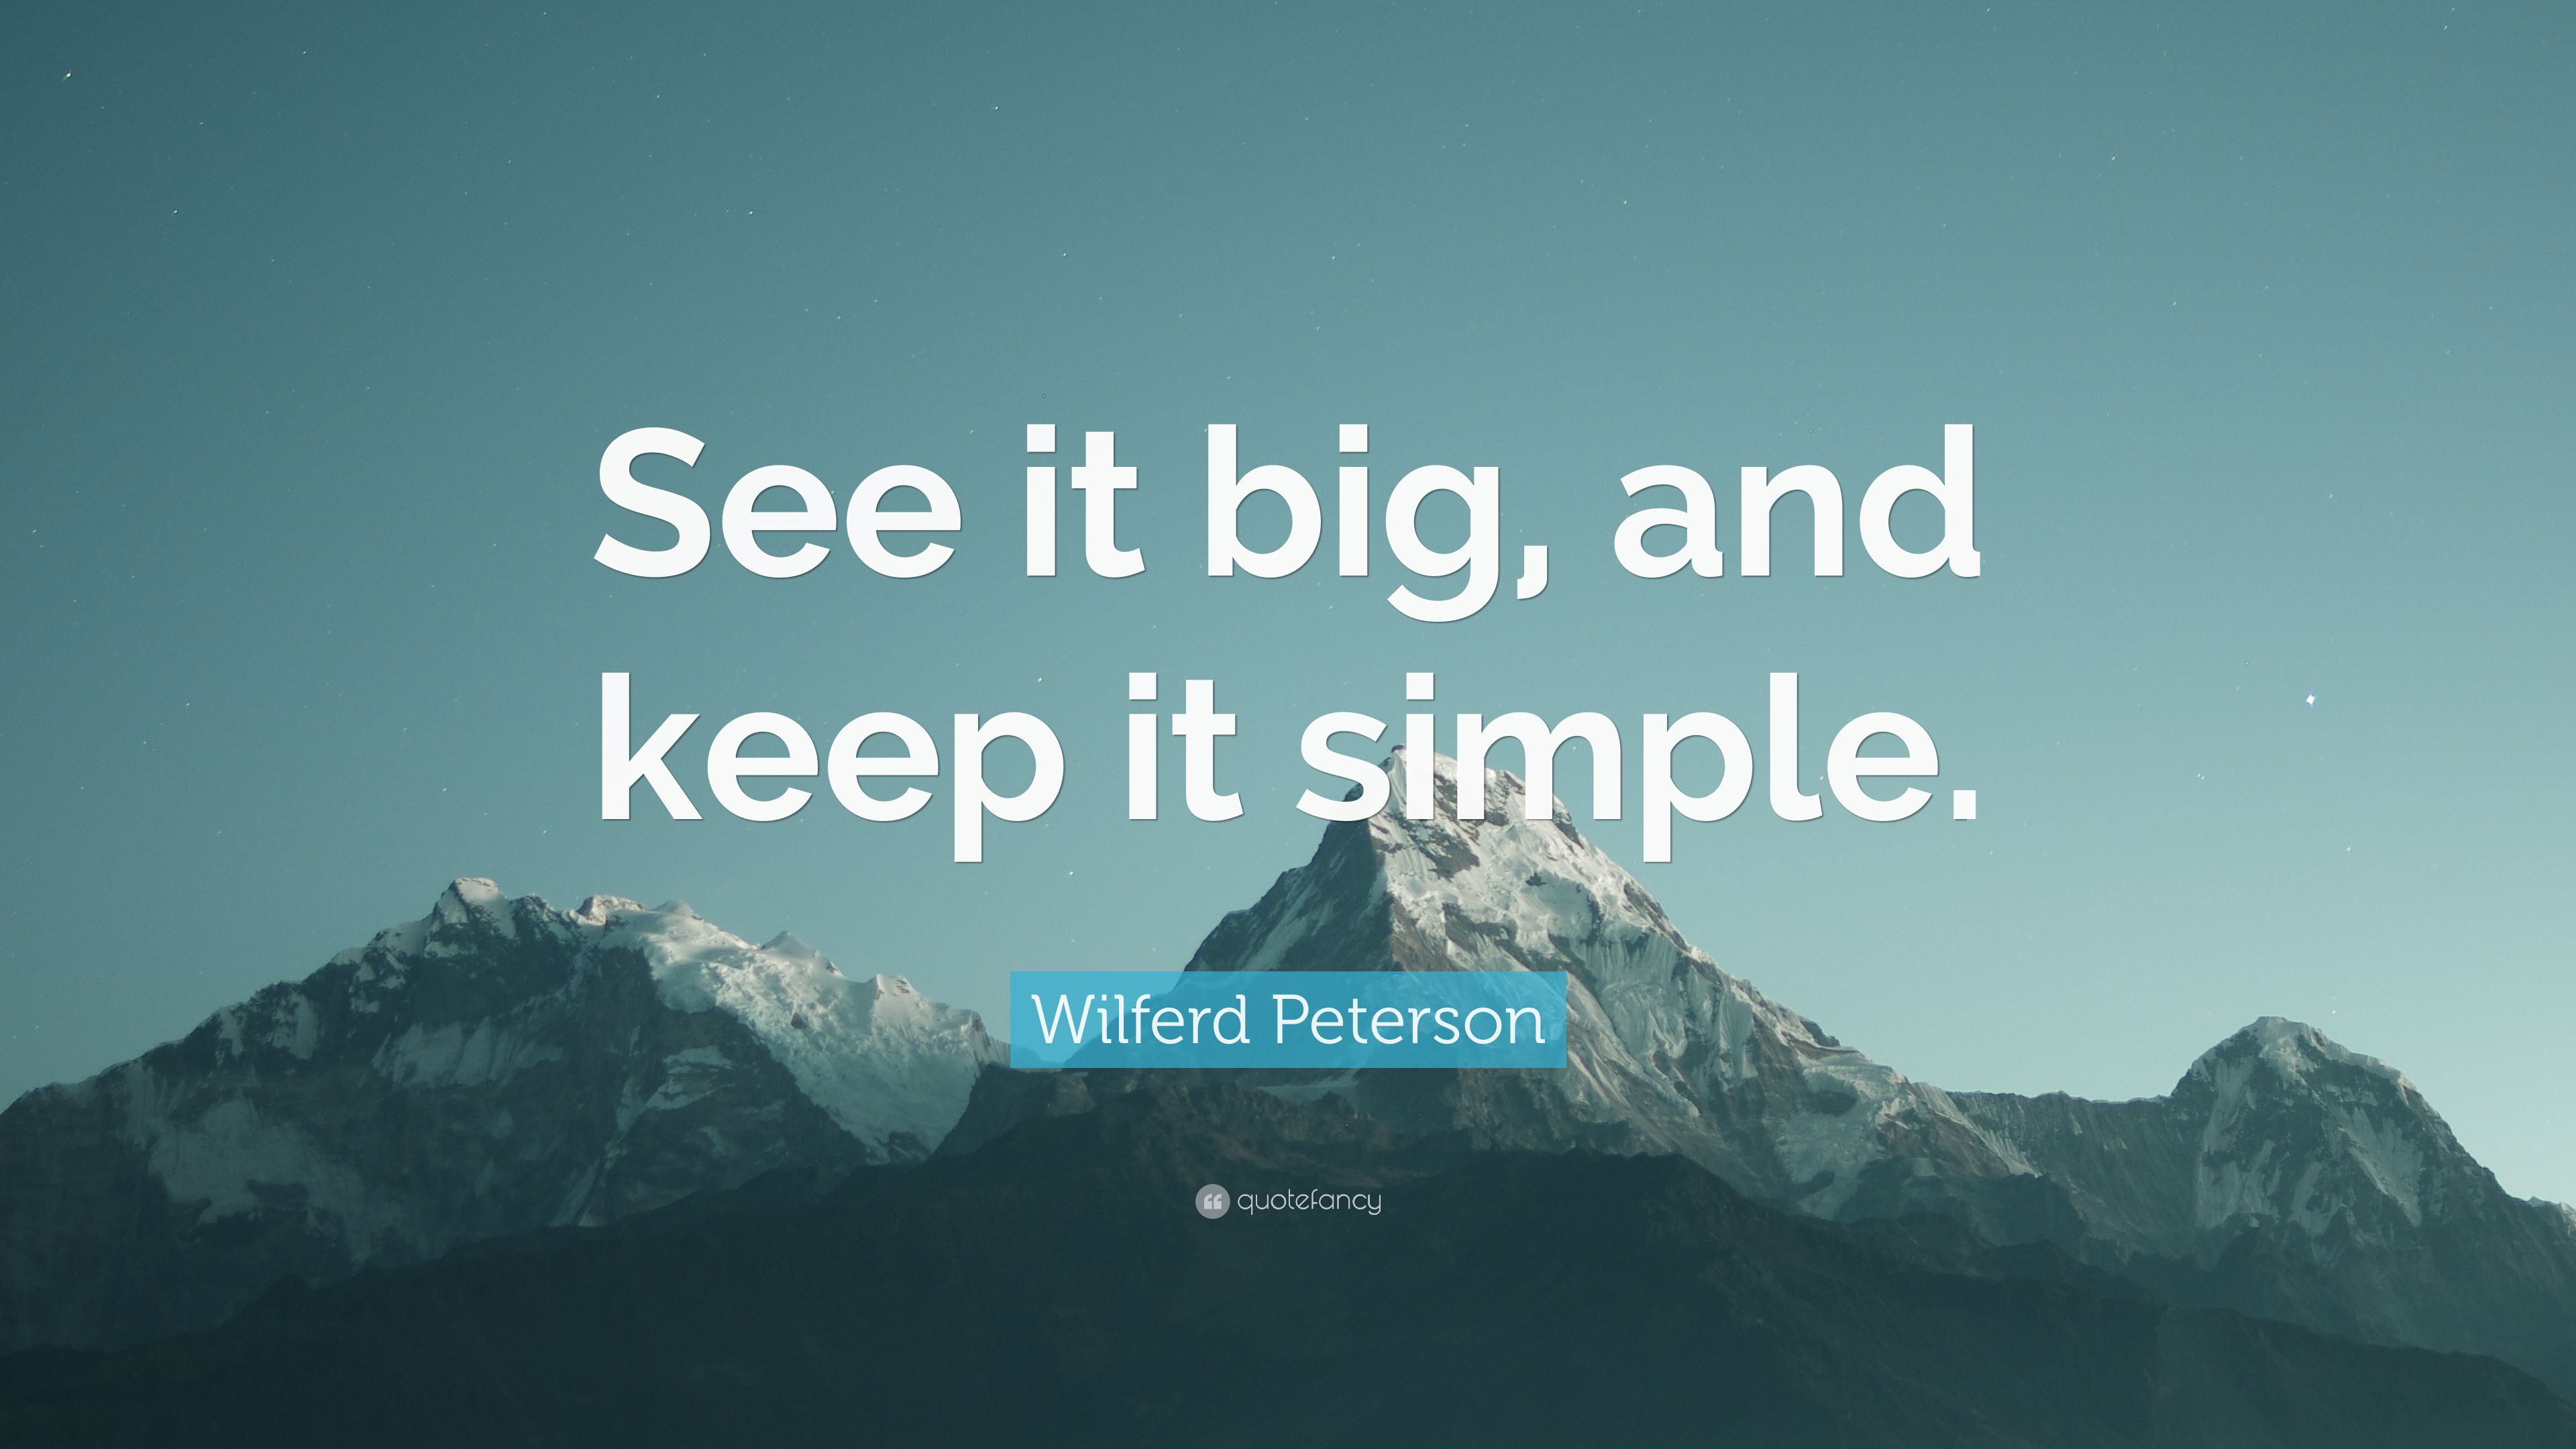 Wilferd Peterson Quote: “See it big, and keep it simple.” (12 wallpaper)